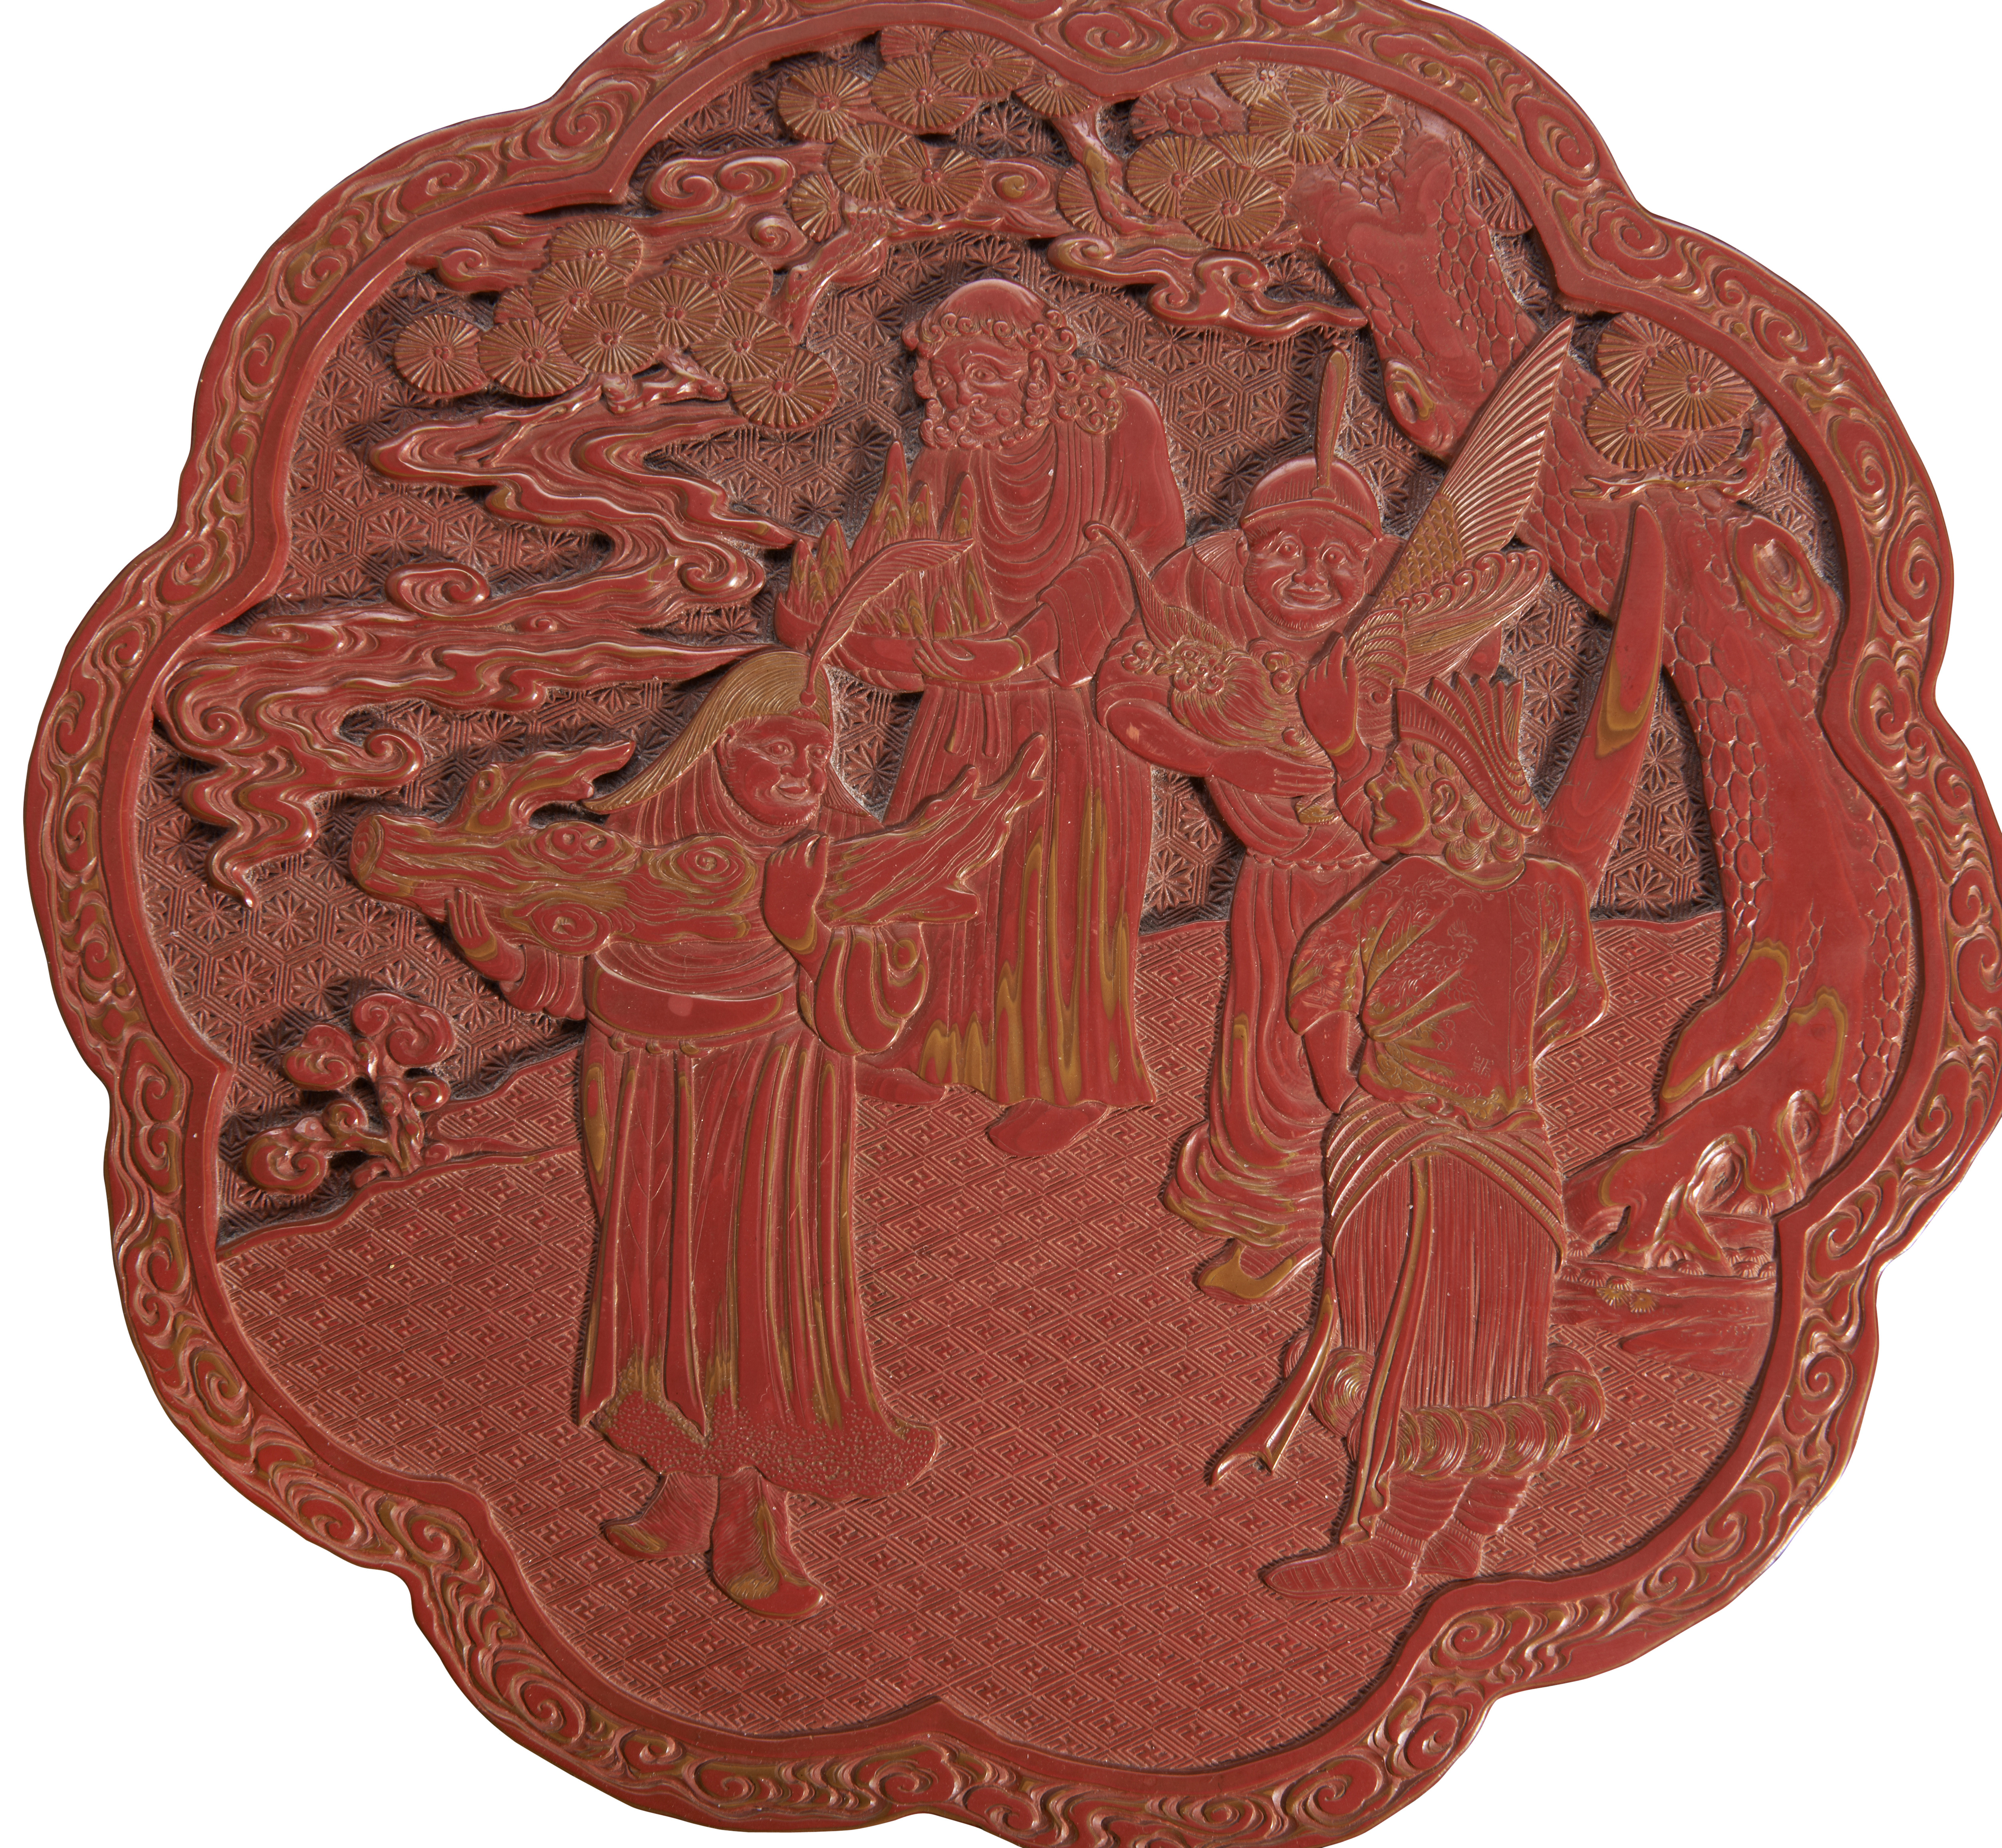 A FINE CINNABAR LACQUER DISH QIANLONG PERIOD (1736-1795) 清 剔红方形漆盘 red square carved - Image 4 of 6